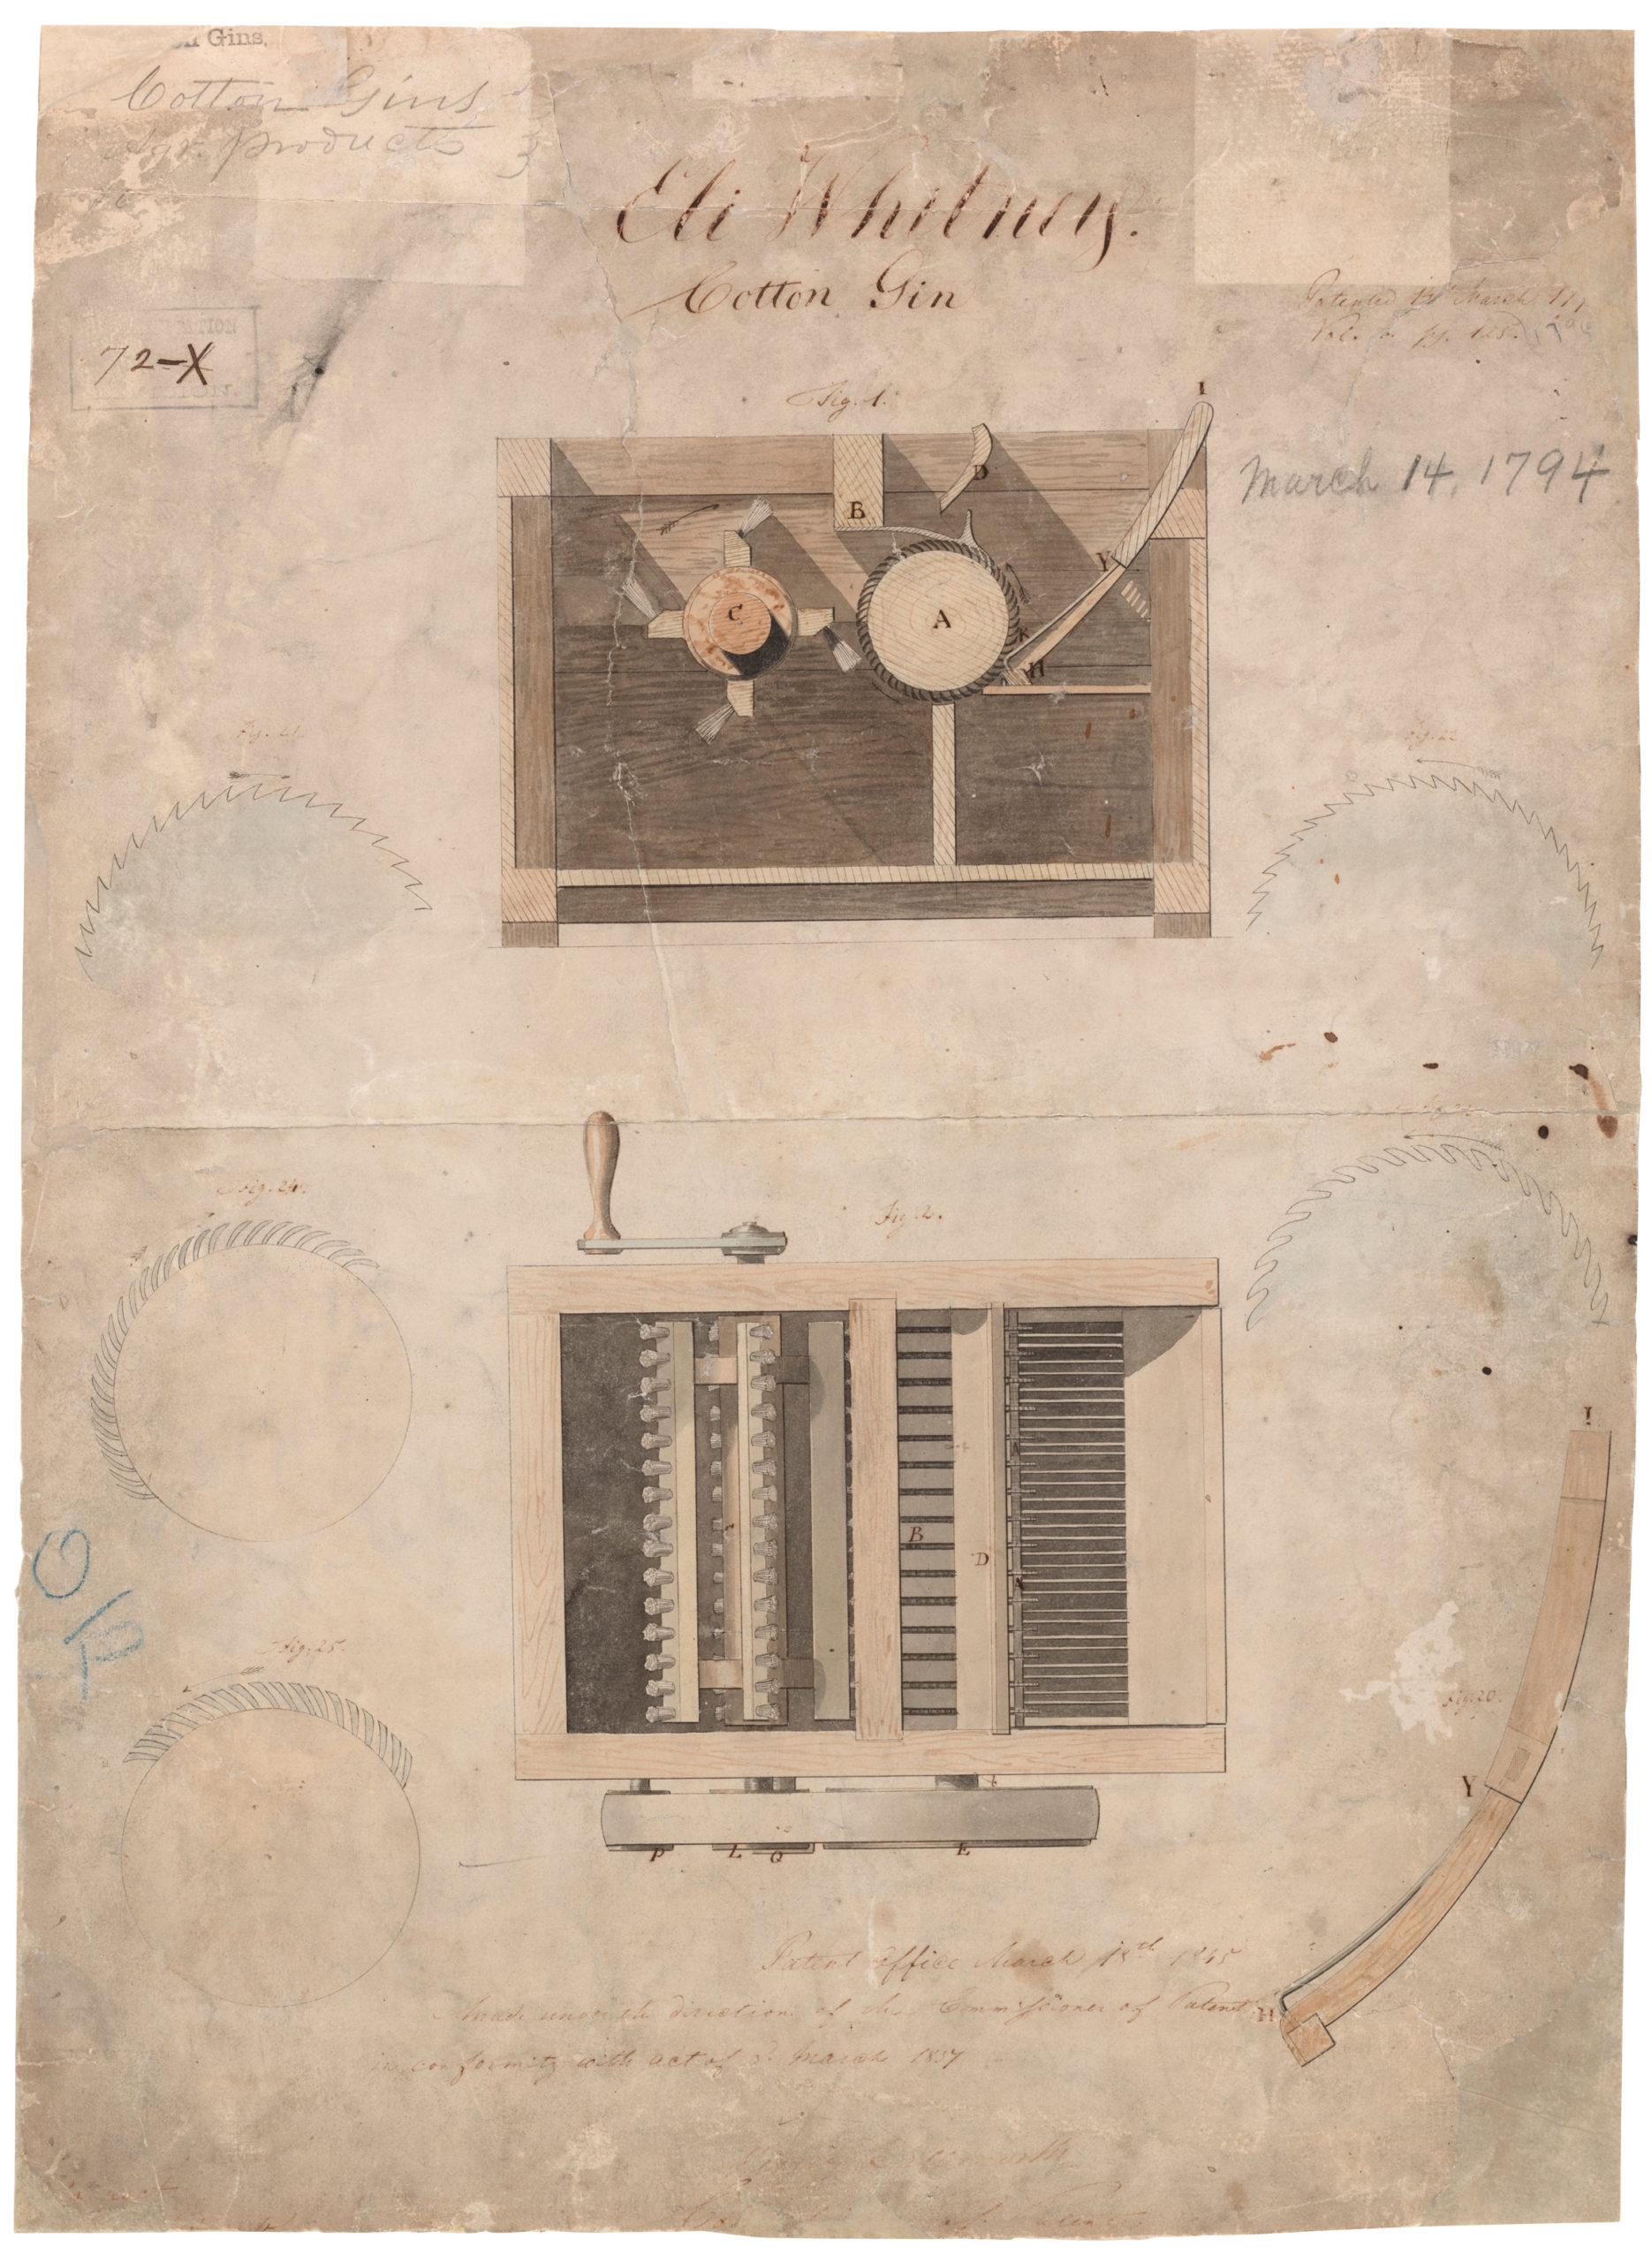 Eli Whitney patent for the cotton gin, March 14, 1794 (Records of the Patent and Trademark Office; Record Group 241, National Archives)